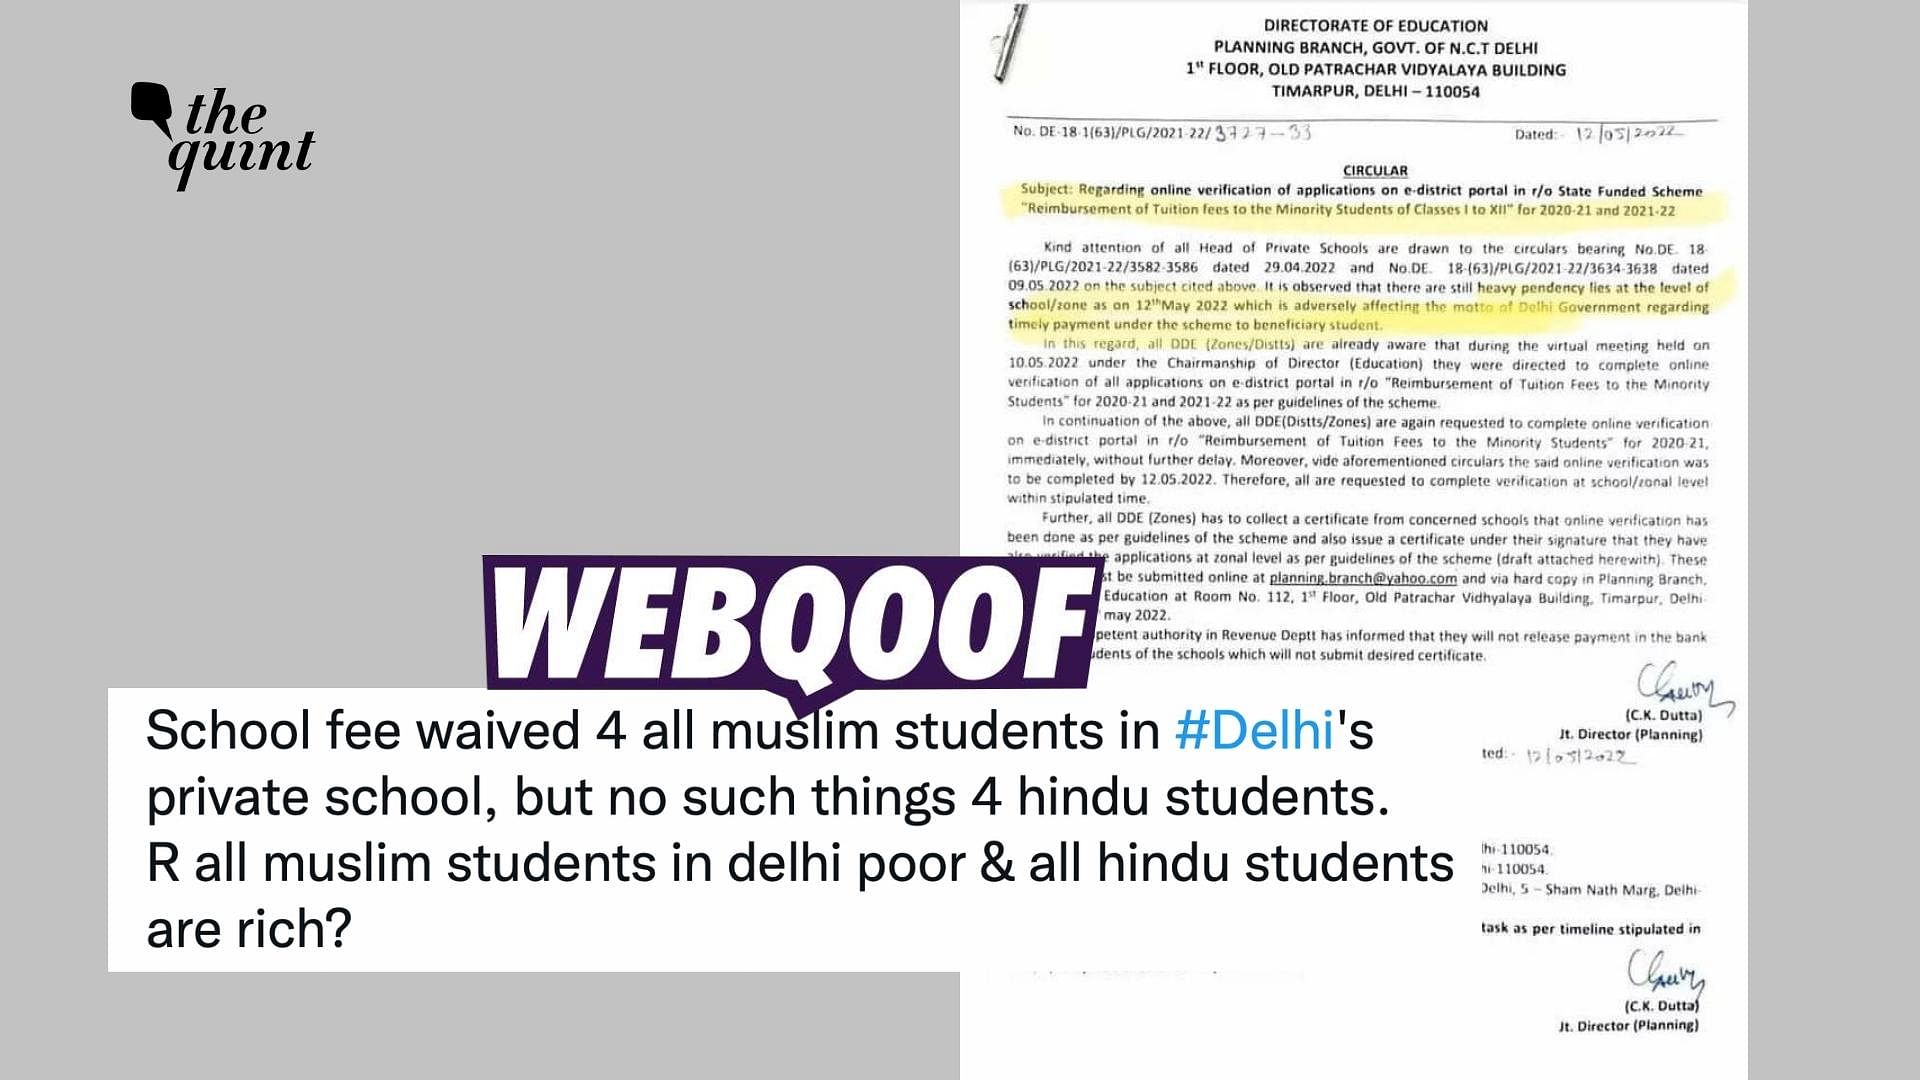 <div class="paragraphs"><p>The circular is being shared to claim that the Delhi government has directed private schools to reimburse tuition fees to only Muslim students.</p></div>